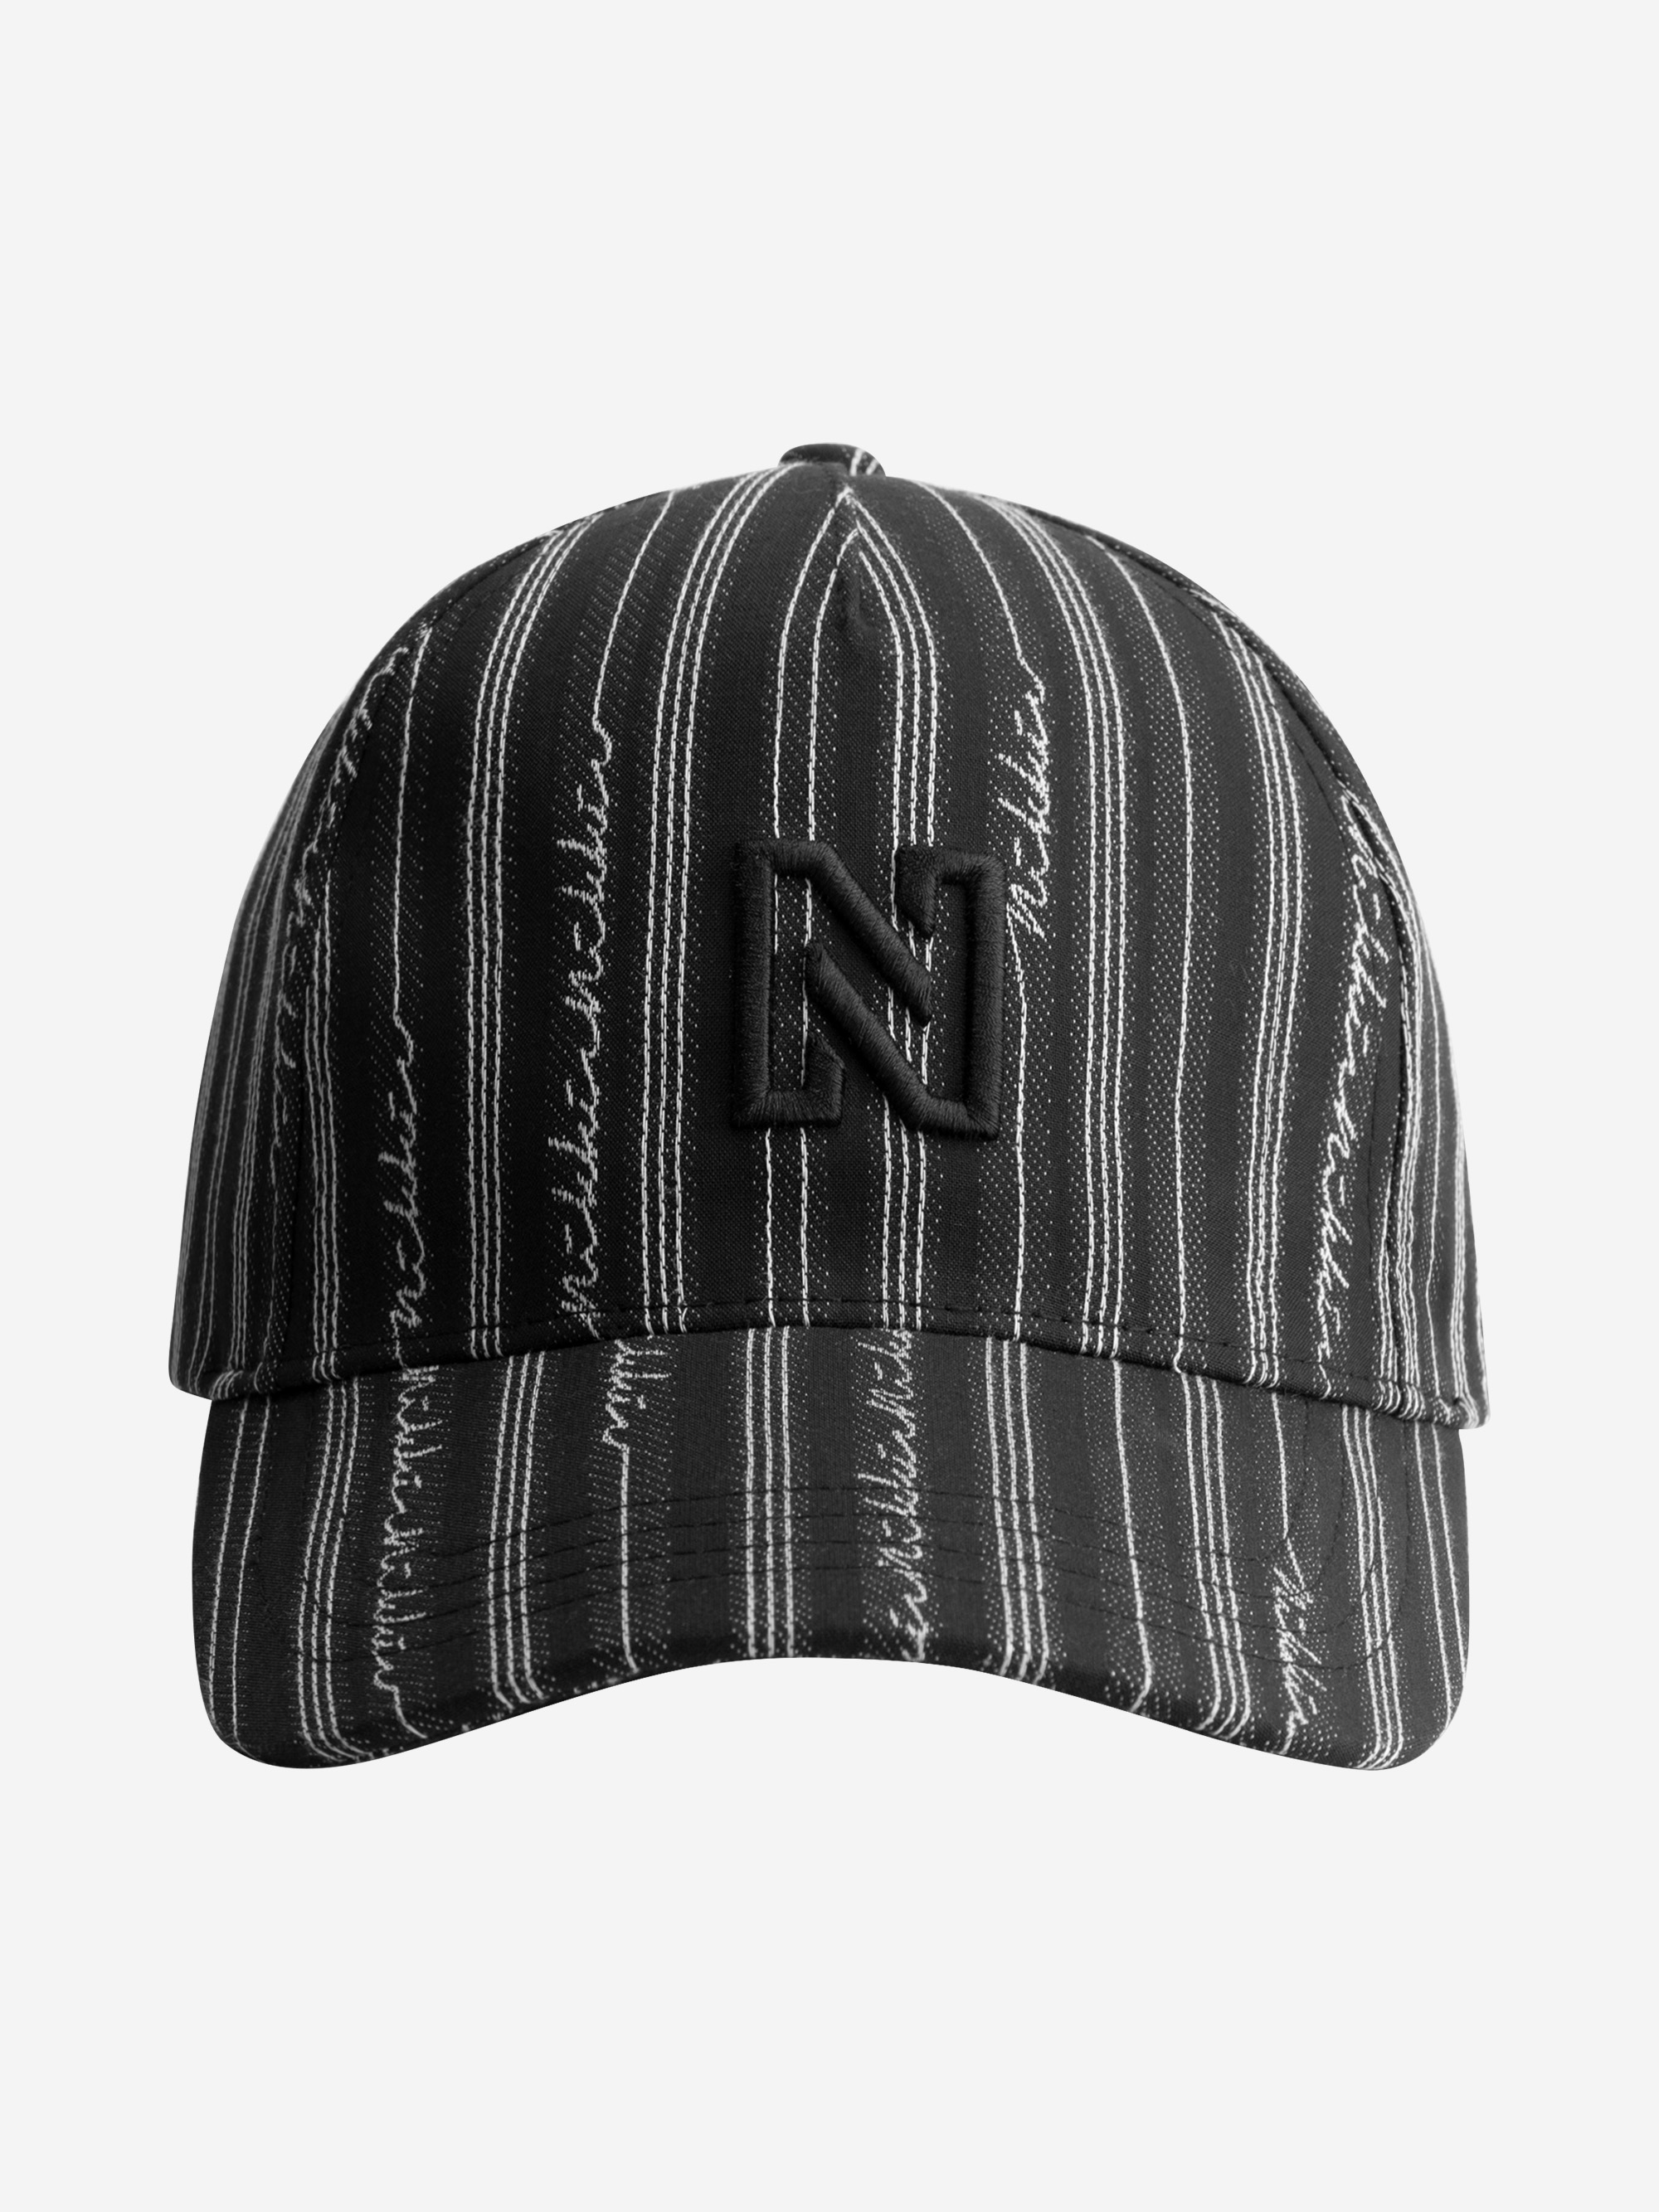 Striped hat with N-logo